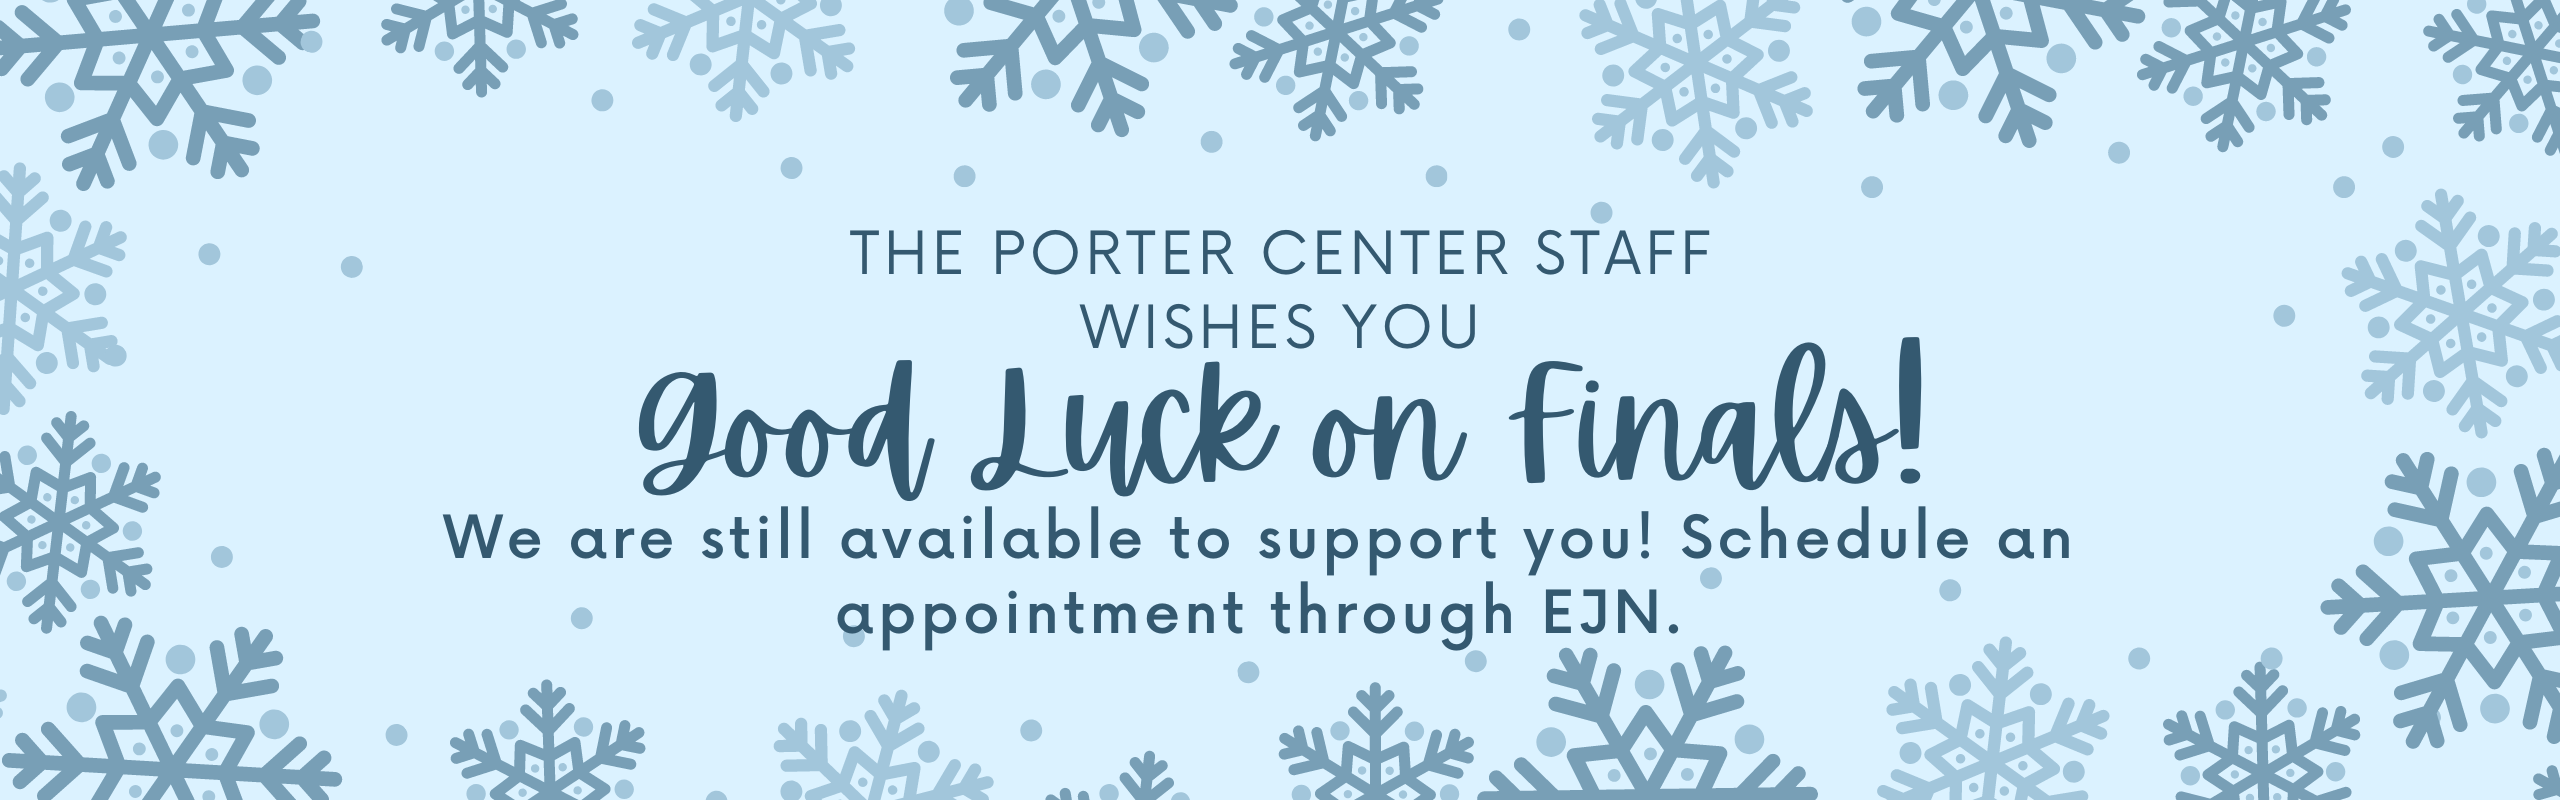 The Porter Center staff wishes you good luck on finals! We are still available to support you! Schedule an appointment through EJN.